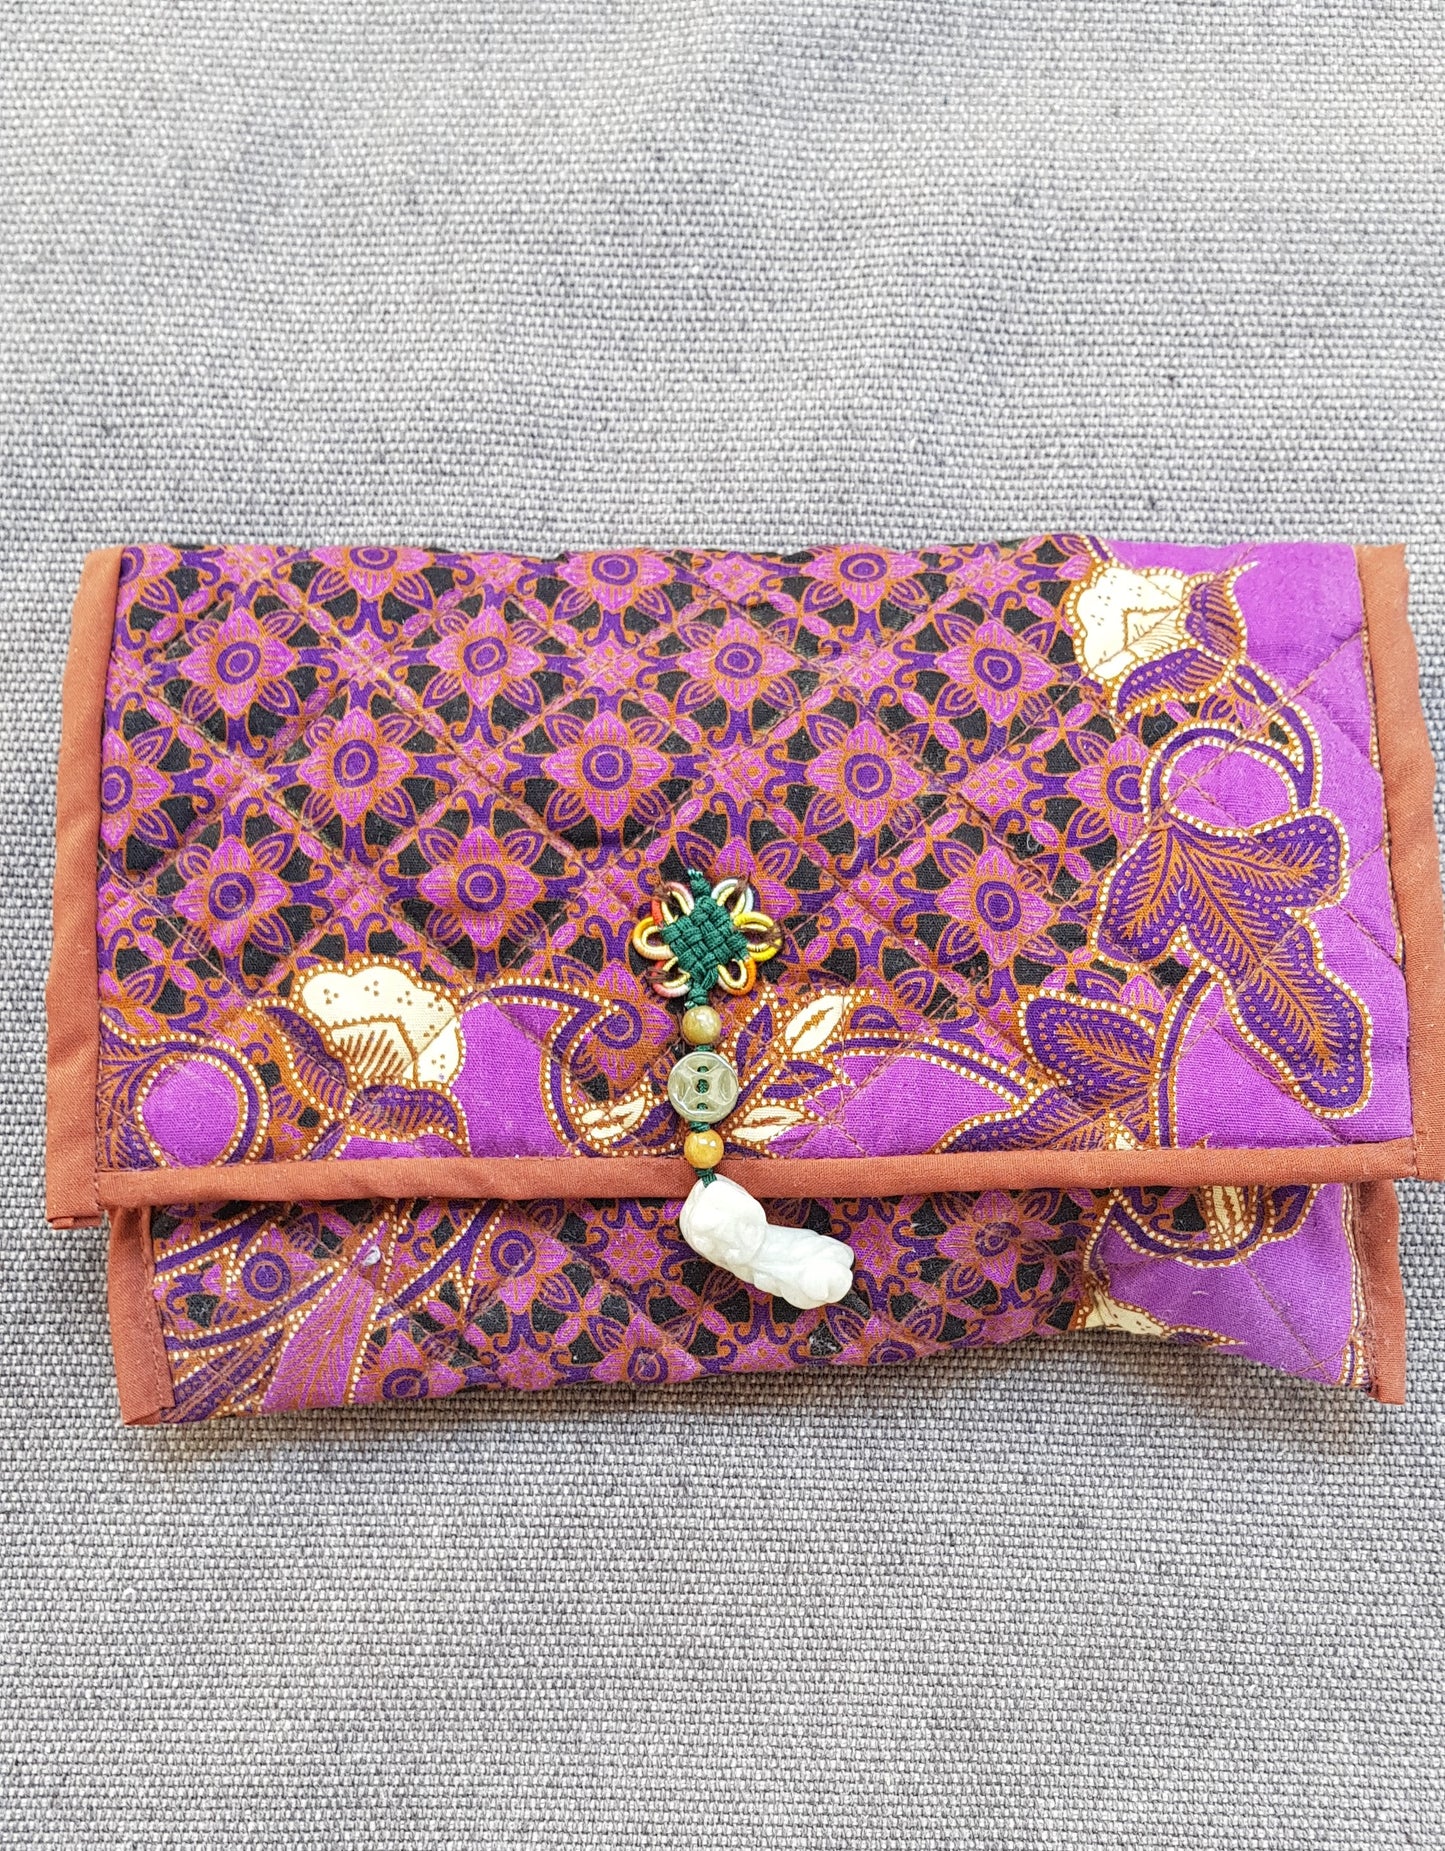 Cosmetic Bag with Jade detailed clasp